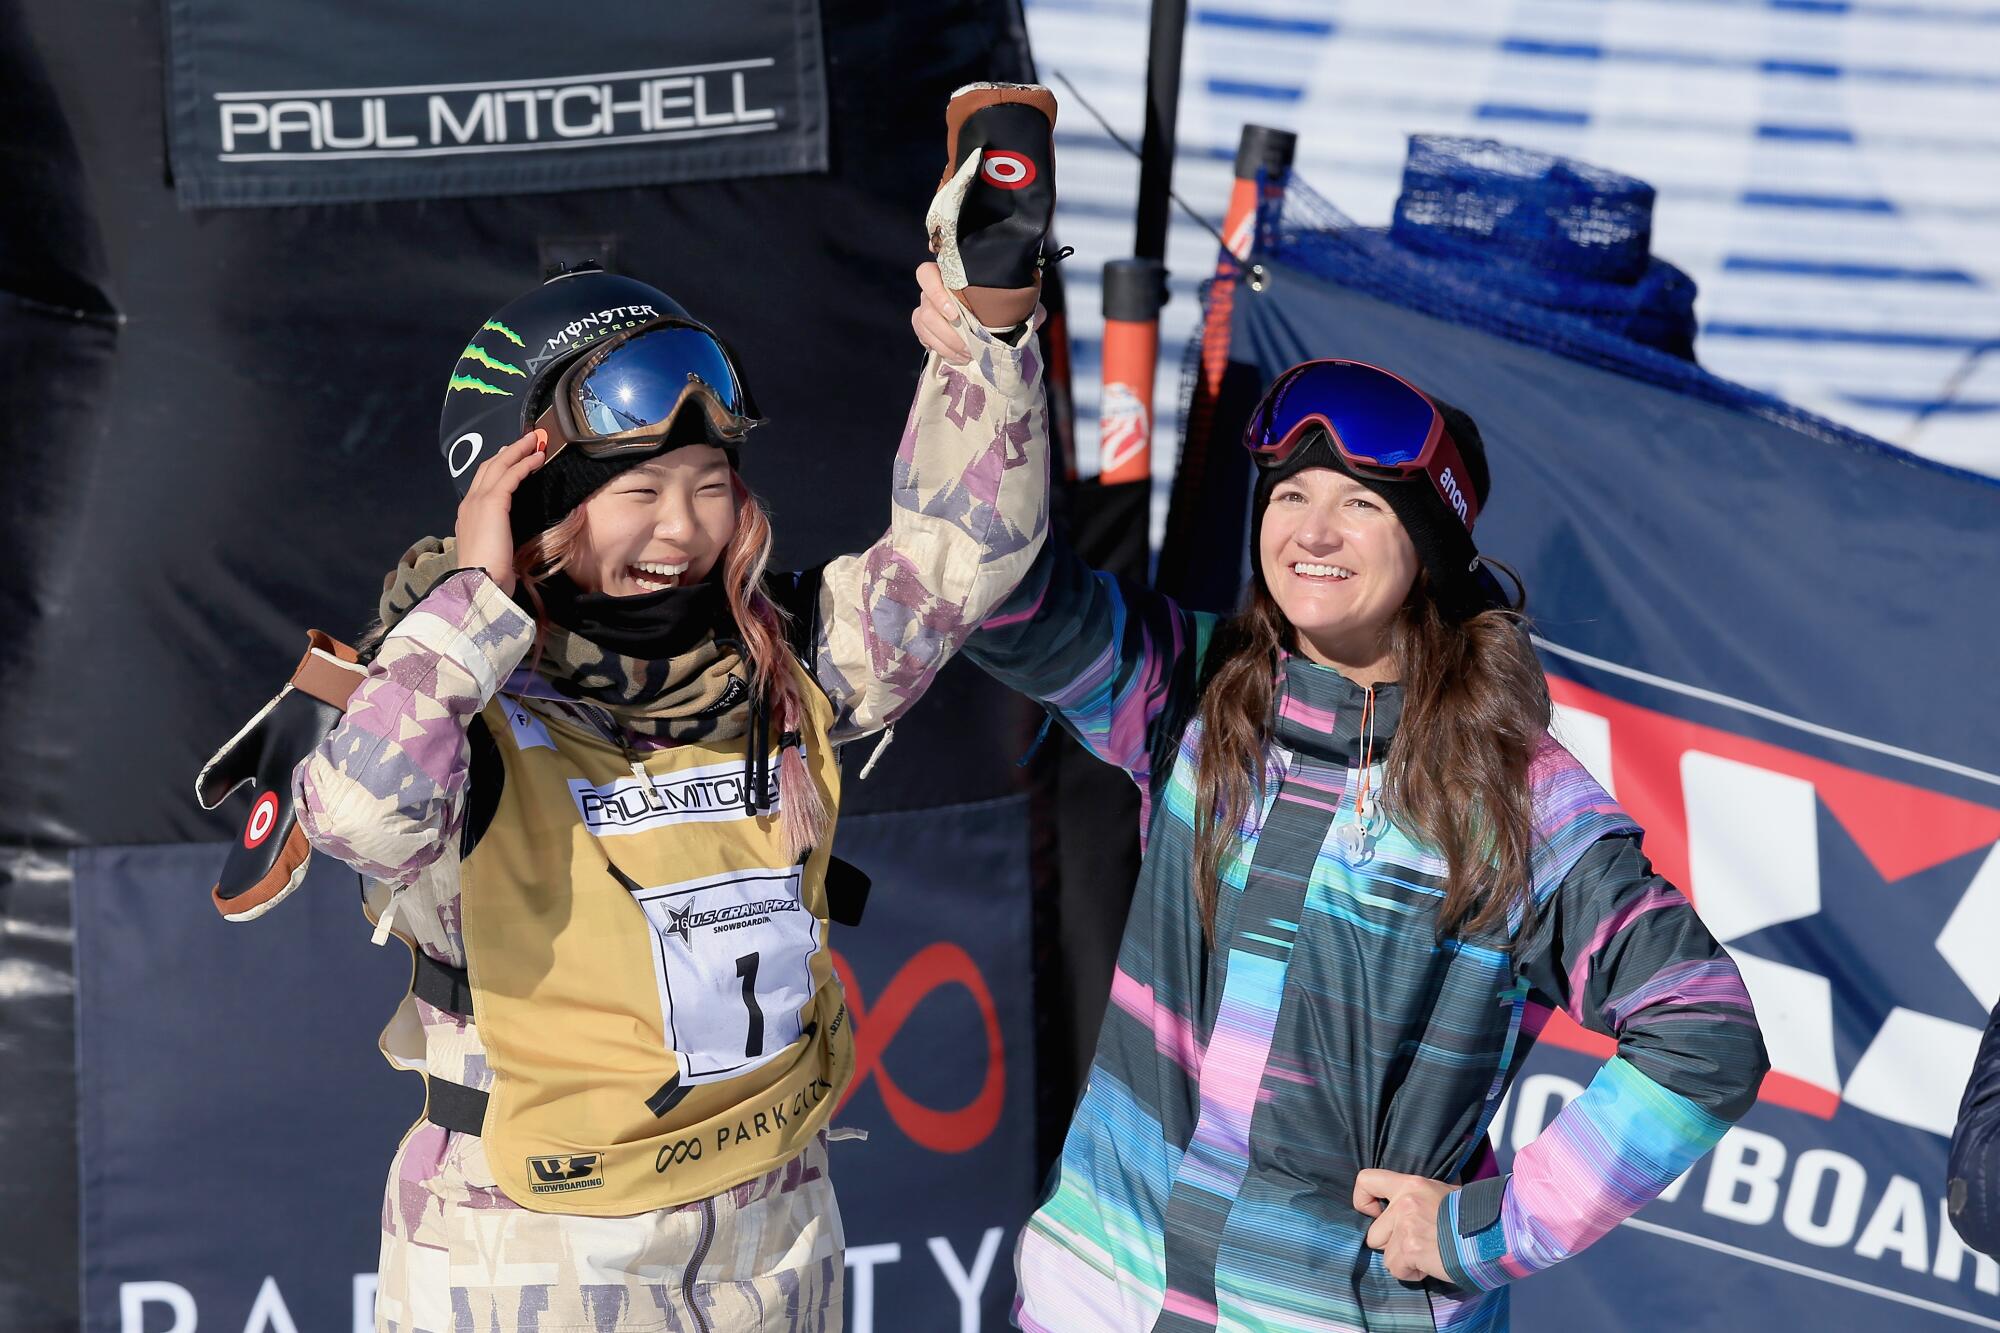 Chloe Kim, left, celebrates a first-place finish with Kelly Clark in the ladies' FIS Snowboard World Cup at the 2016 U.S Snowboarding Park City Grand Prix in Park City, Utah.